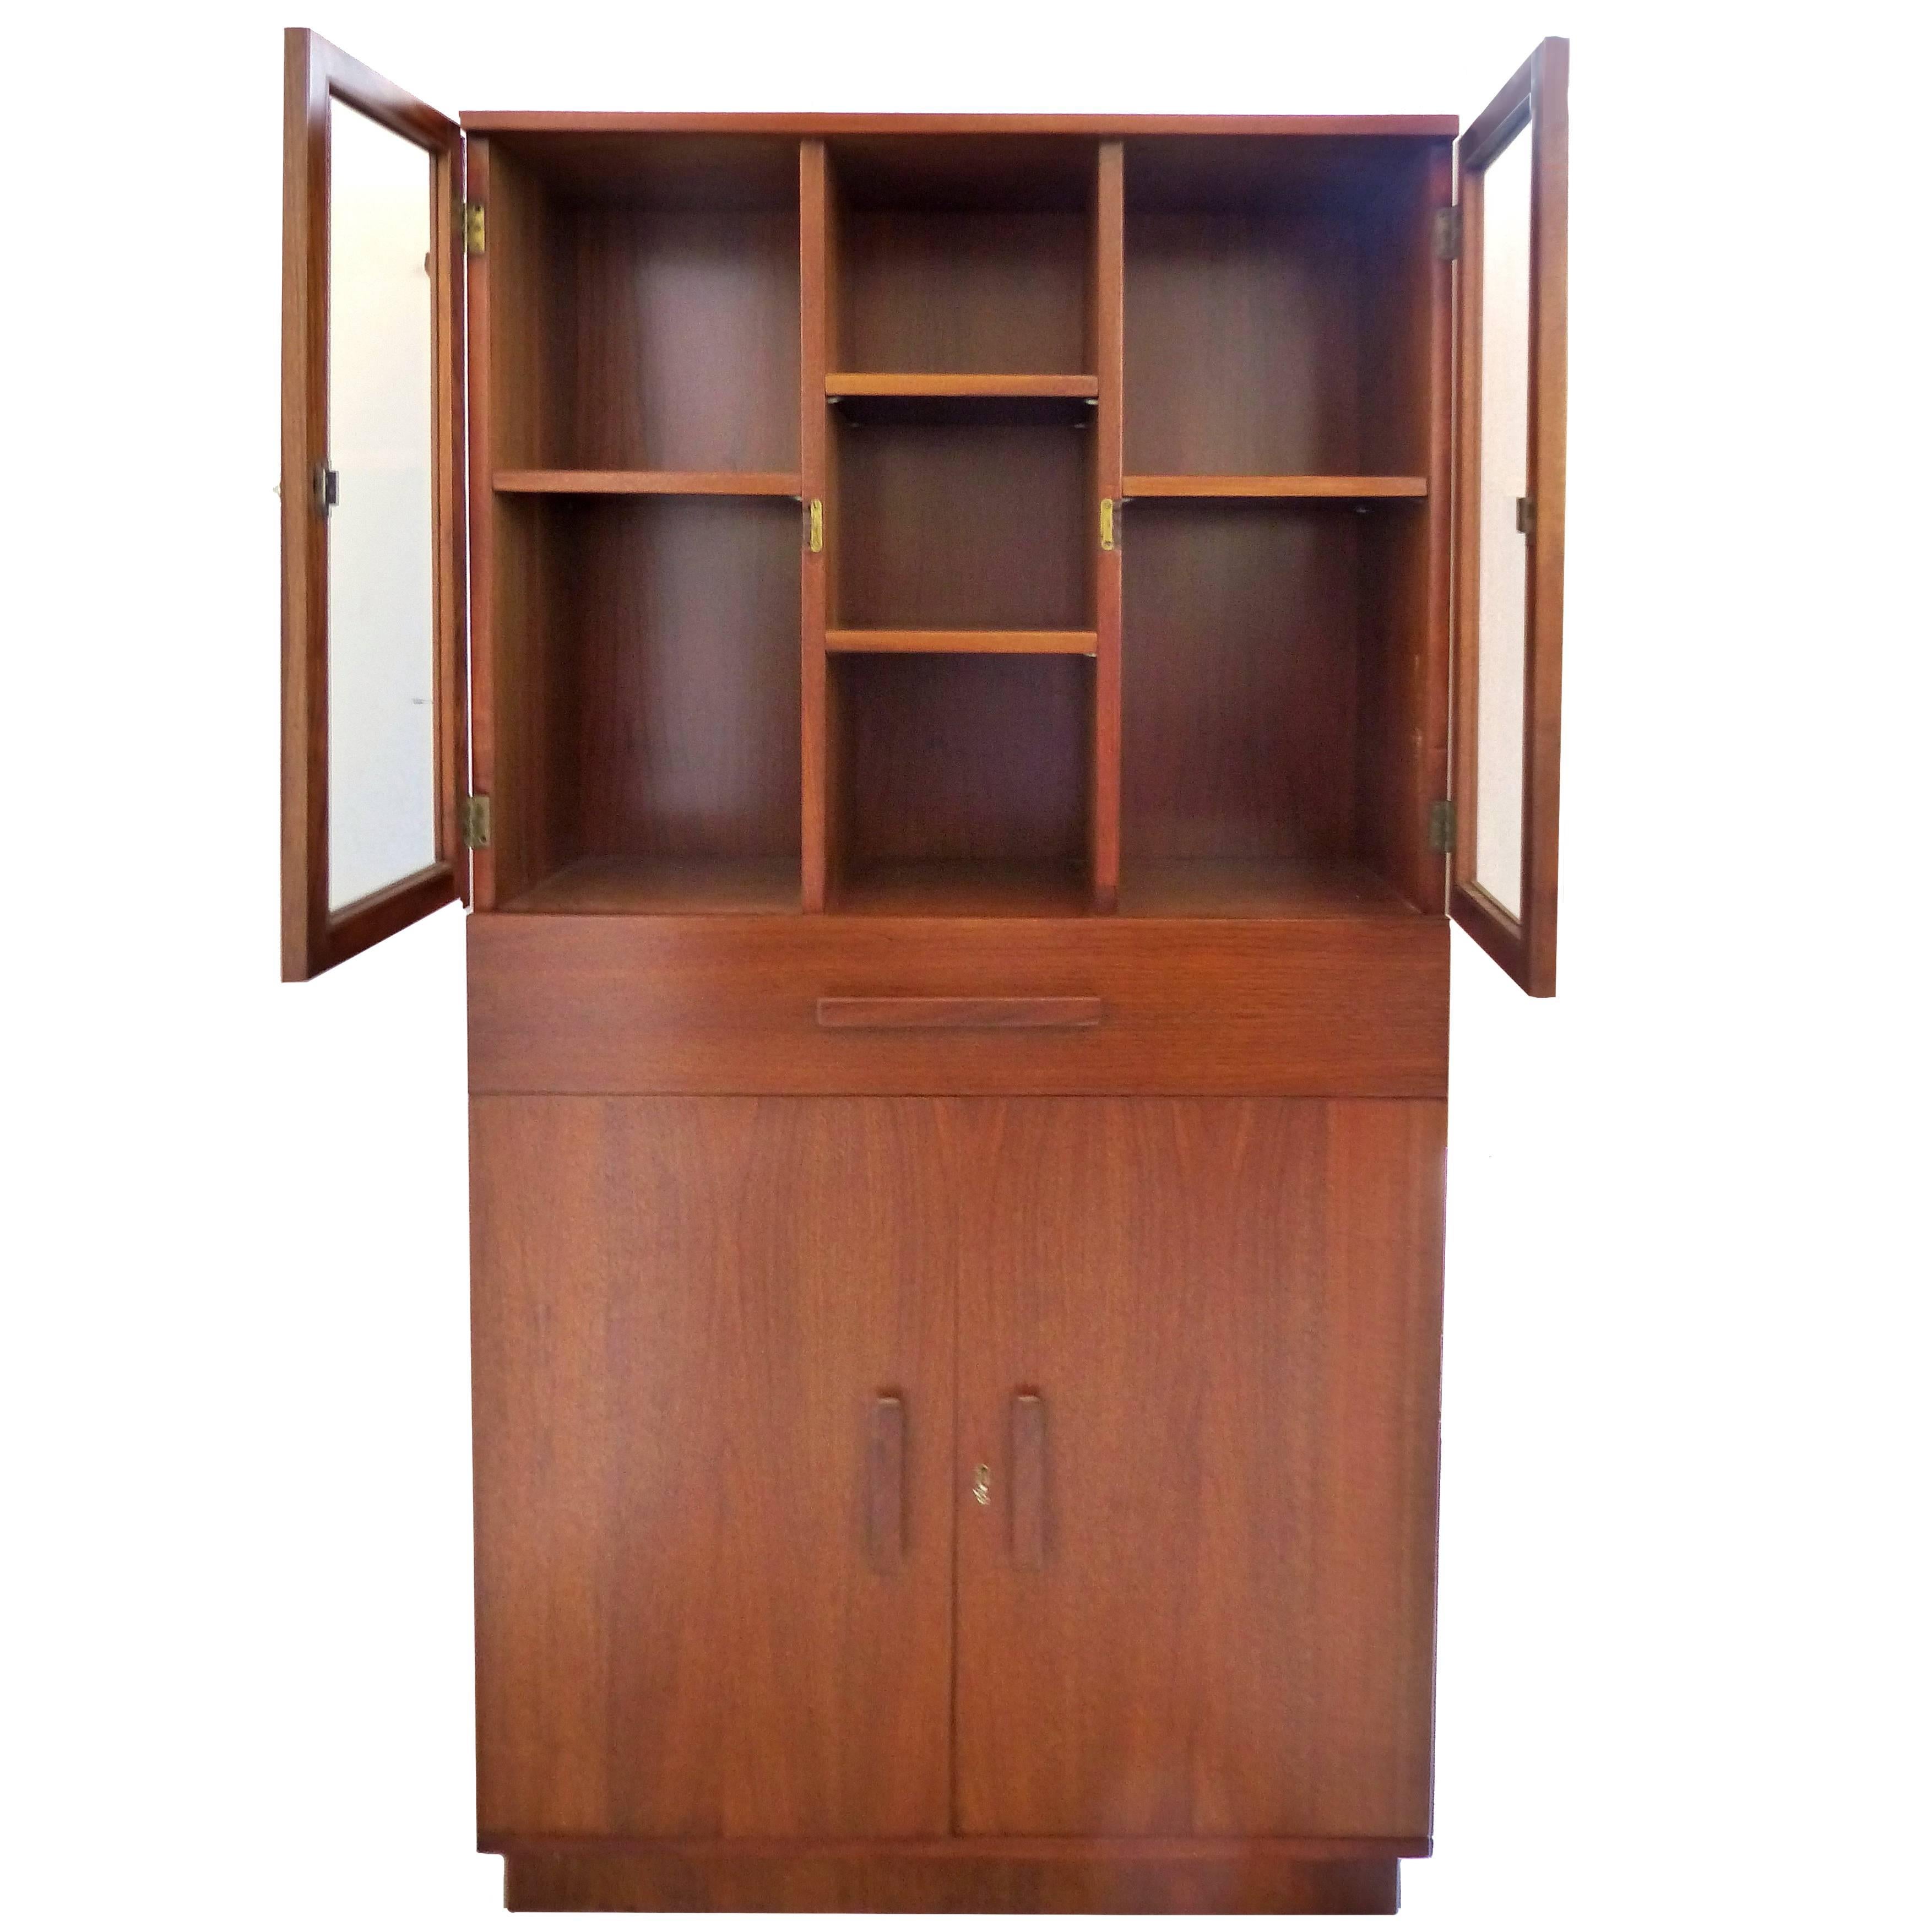 1930s American Deco Bookcase Vitrine by Modernage Furniture